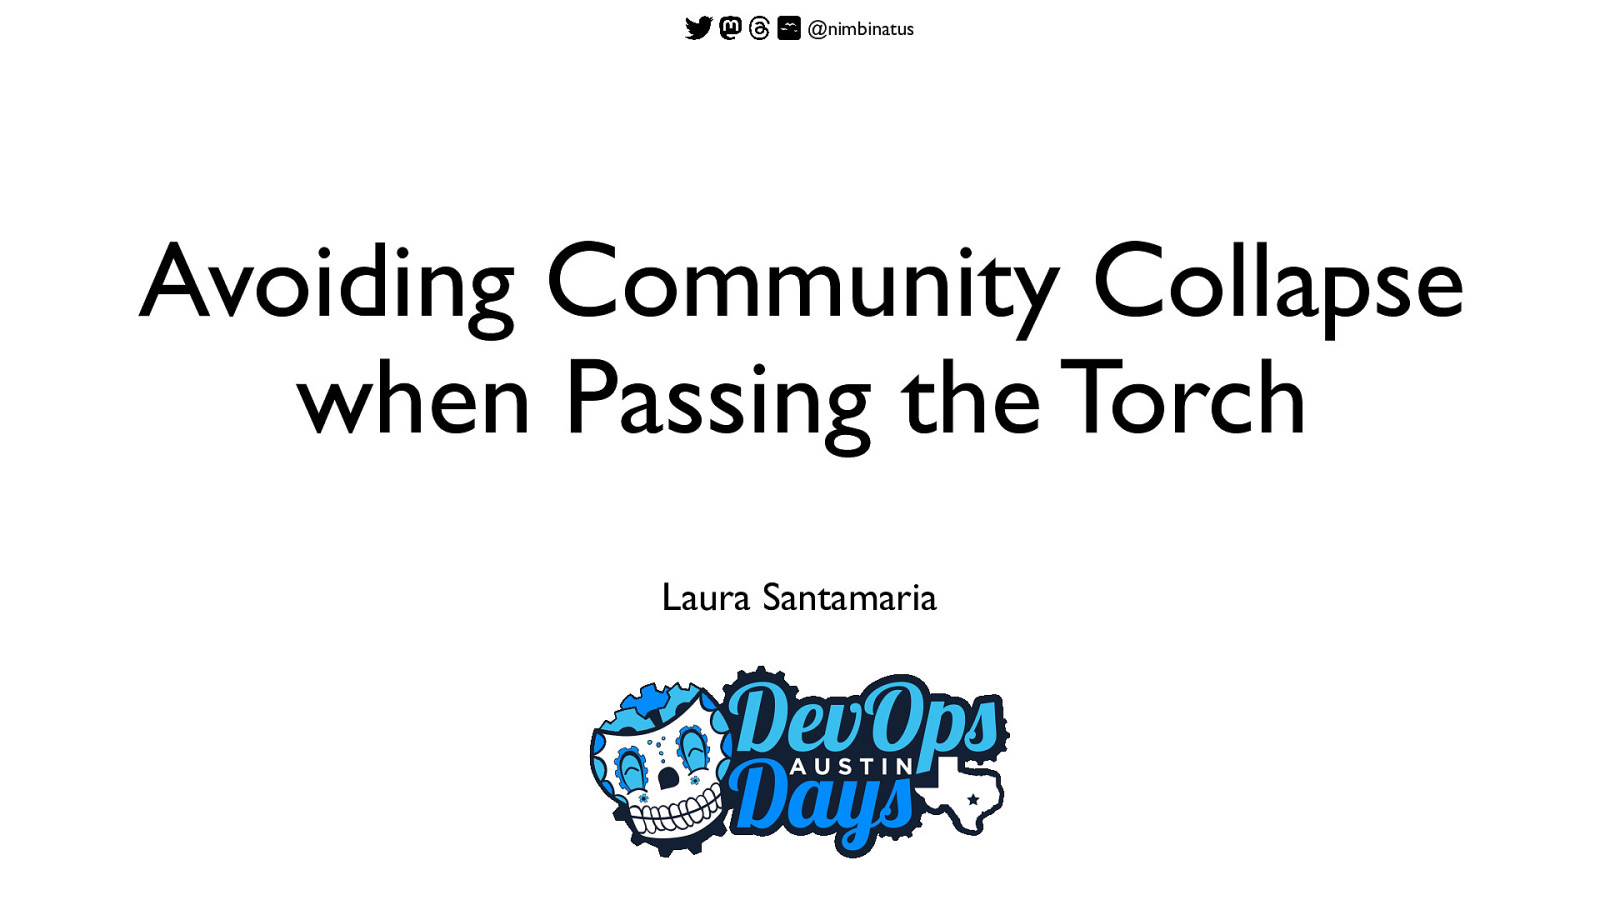 Avoiding Community Collapse when Passing the Torch